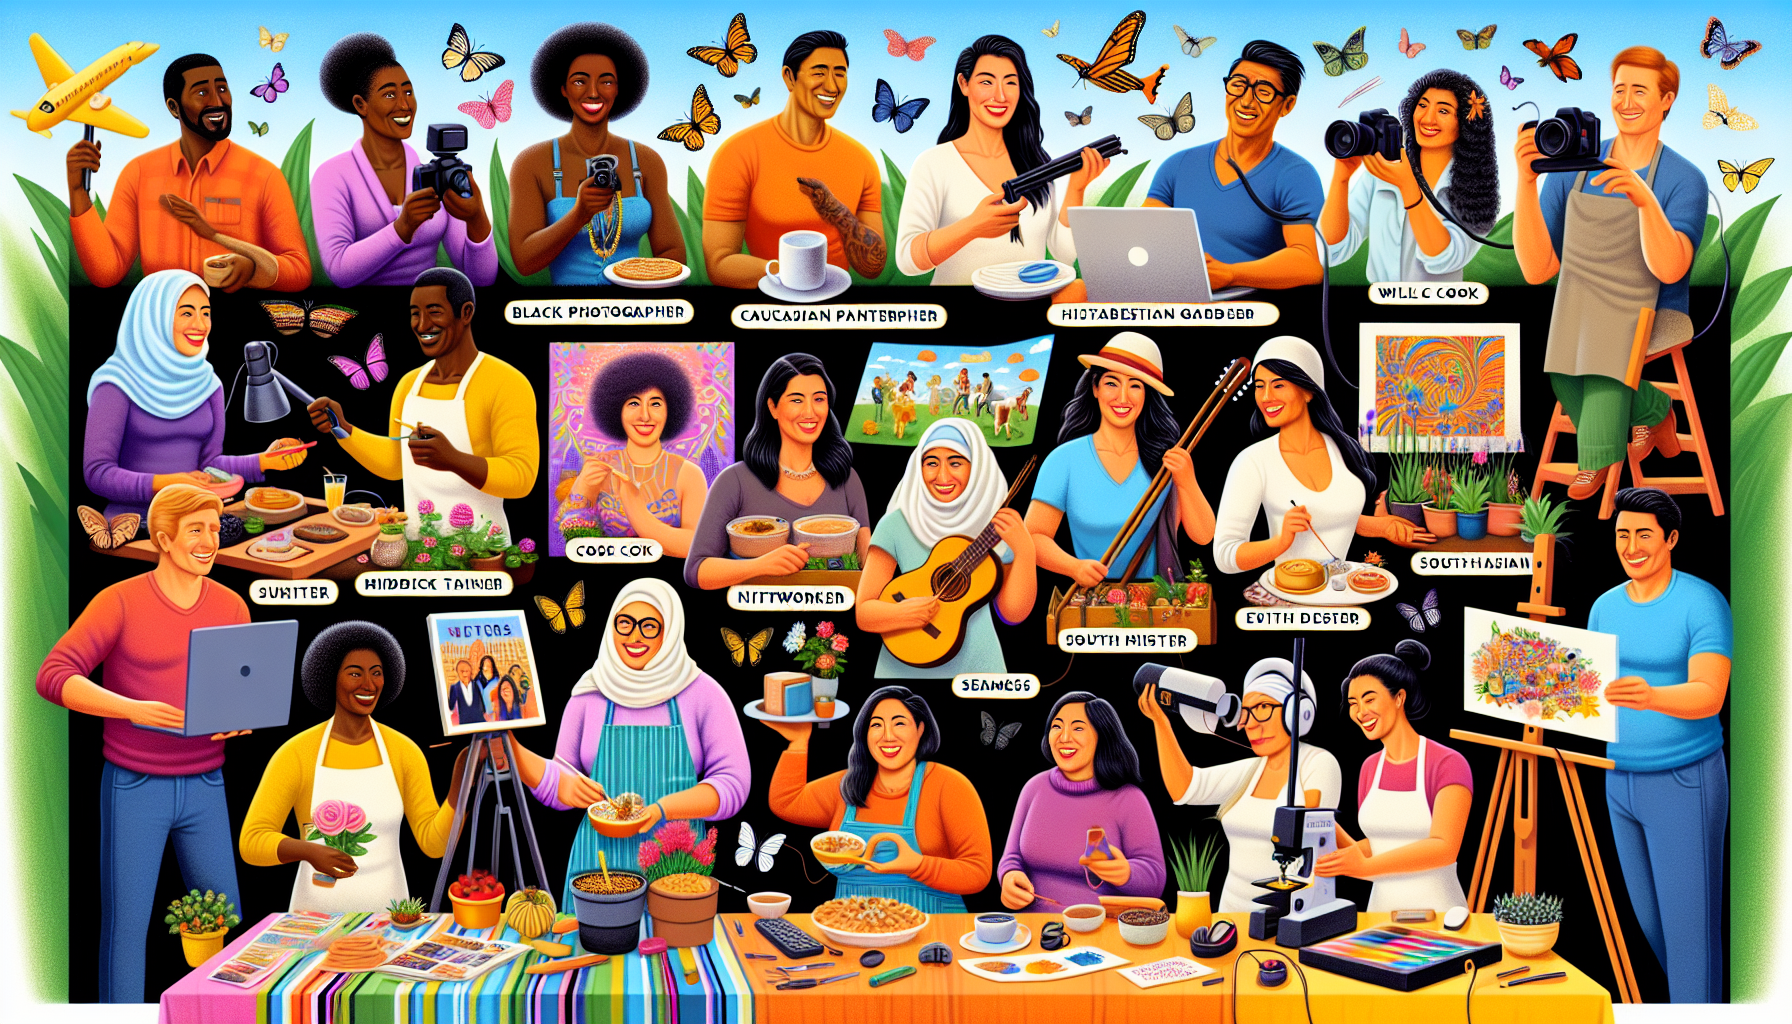 Create a vibrant scene depicting 21 different hobbies being turned into income-generating activities. Include diverse characters engaged in photography, painting, gardening, crafting, playing musical